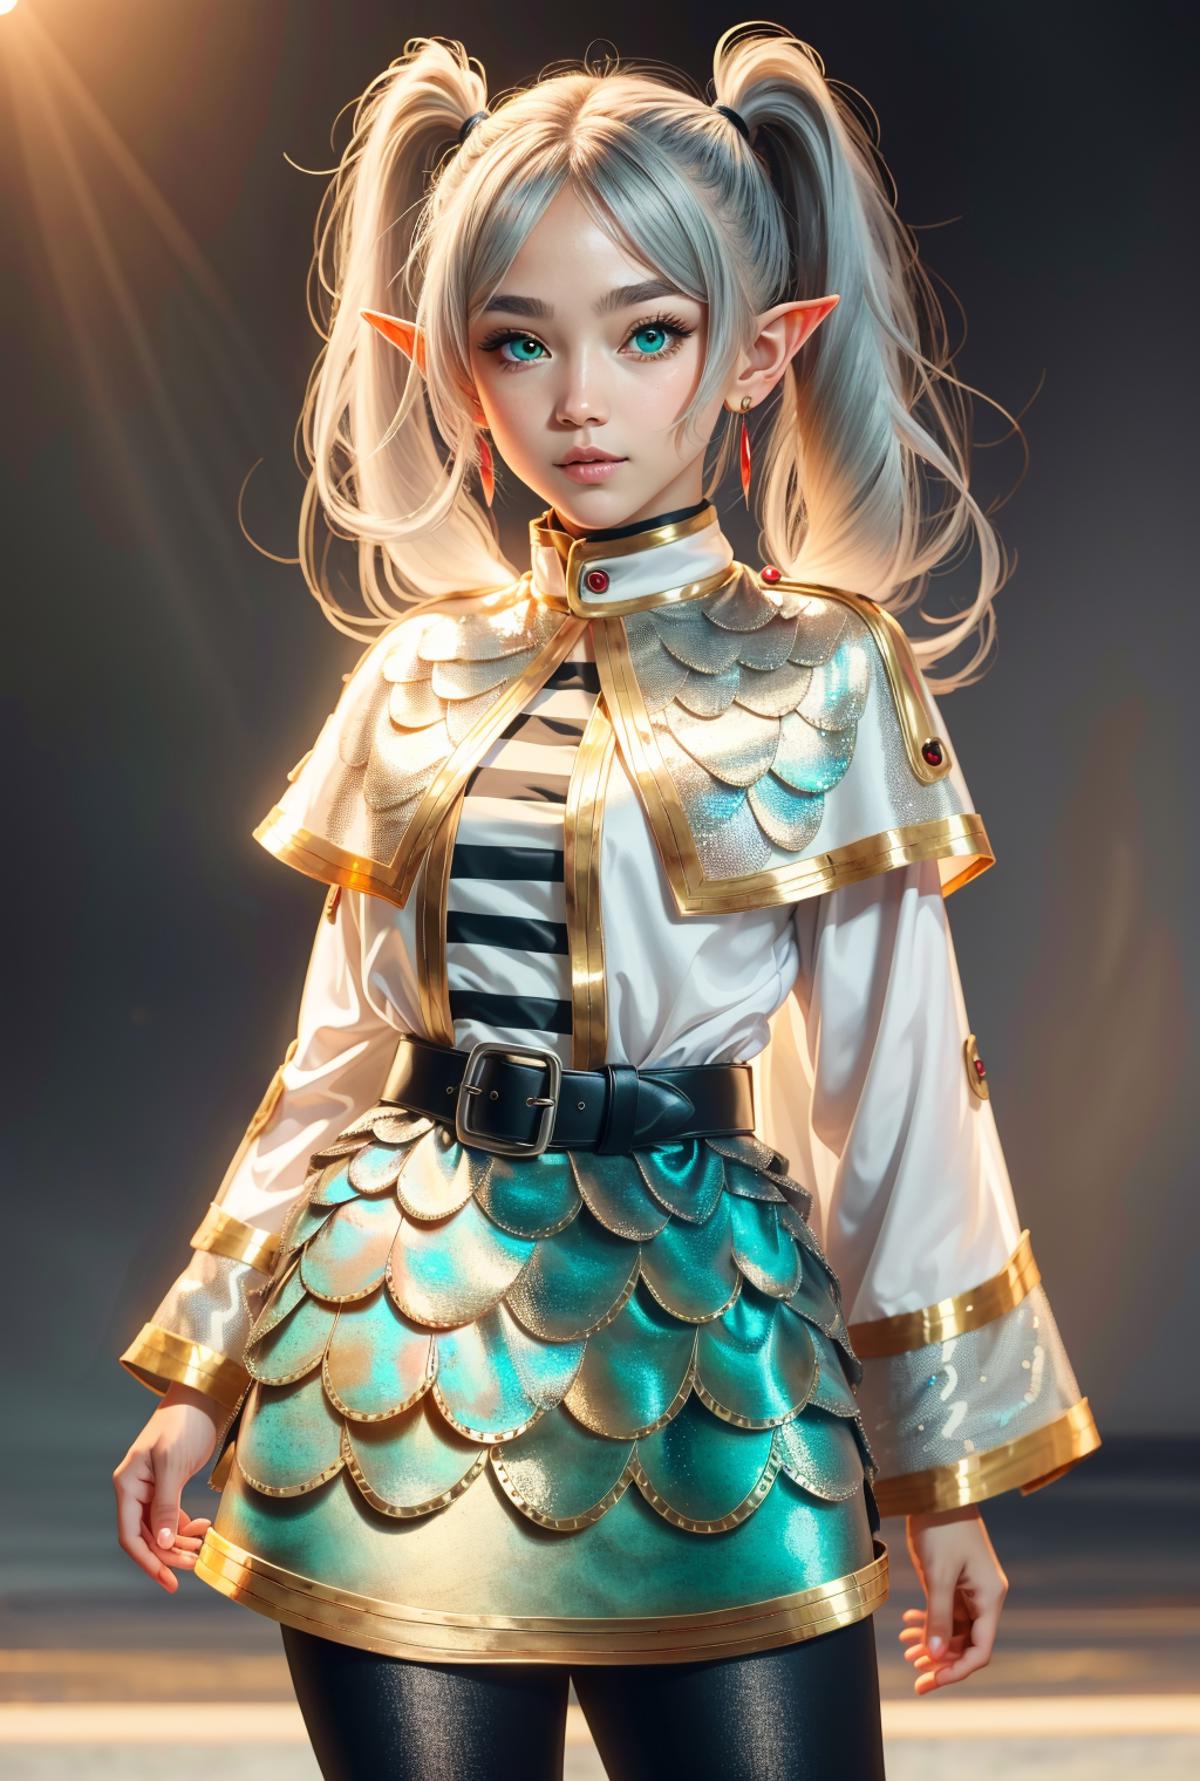 AI model image by fansay